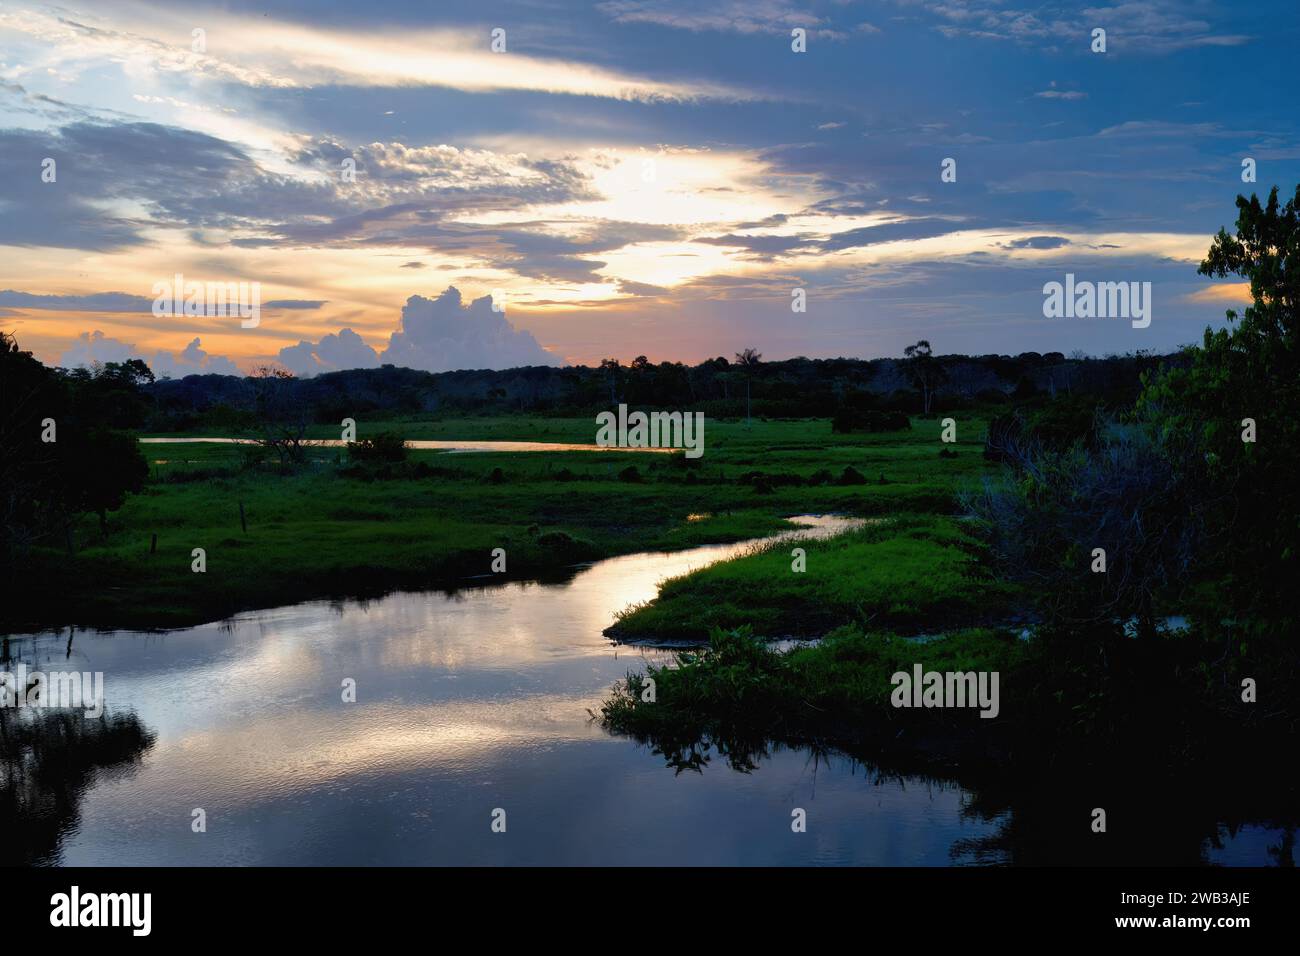 Sunset over a river, Para state, Brazil Stock Photo